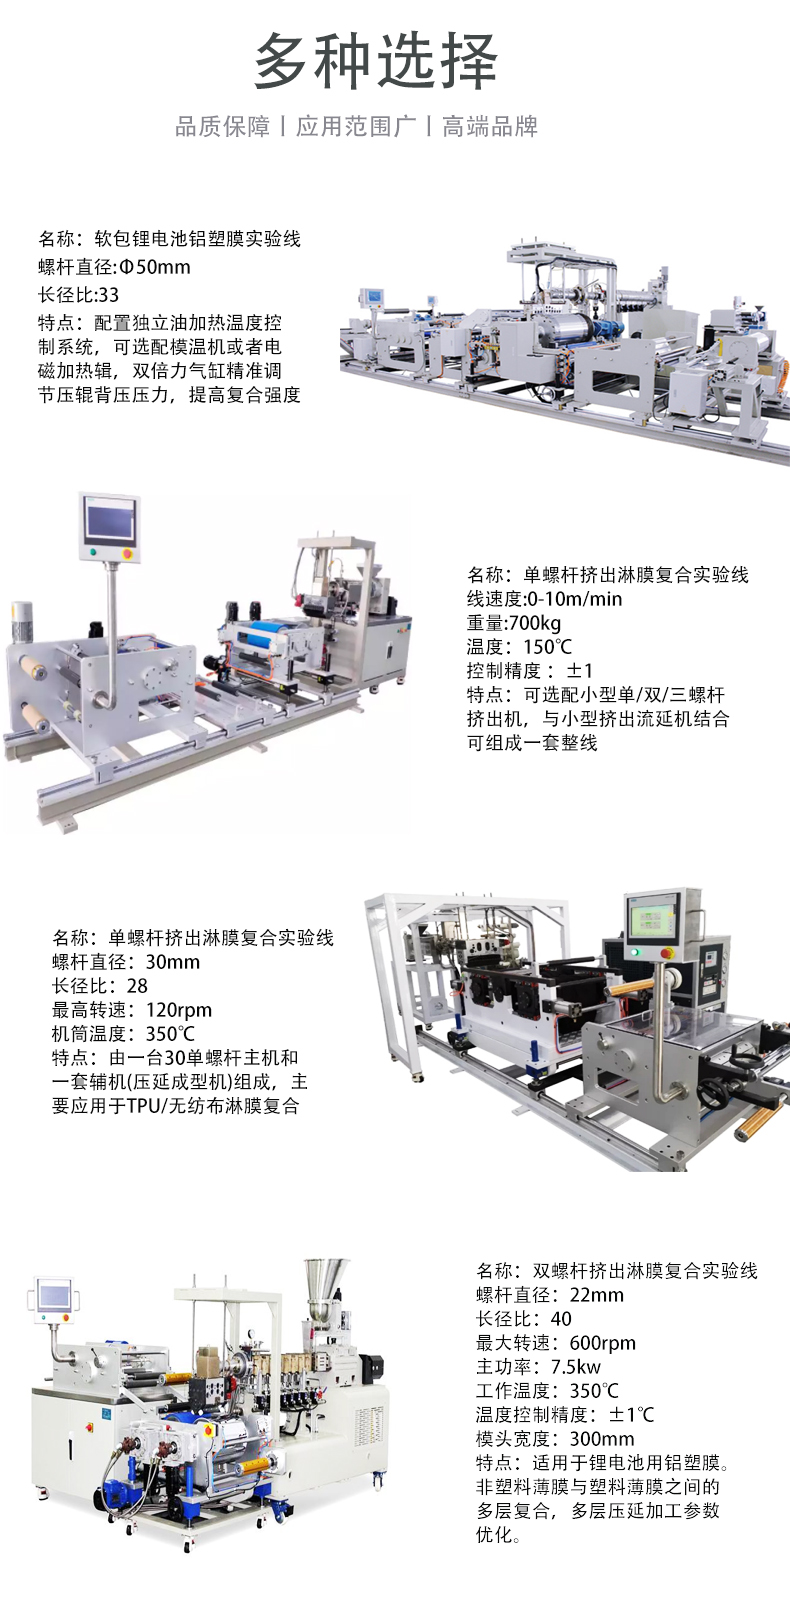 Putong/POTOP single screw composite film extrusion coating machine can perform single sided and double sided composite coating